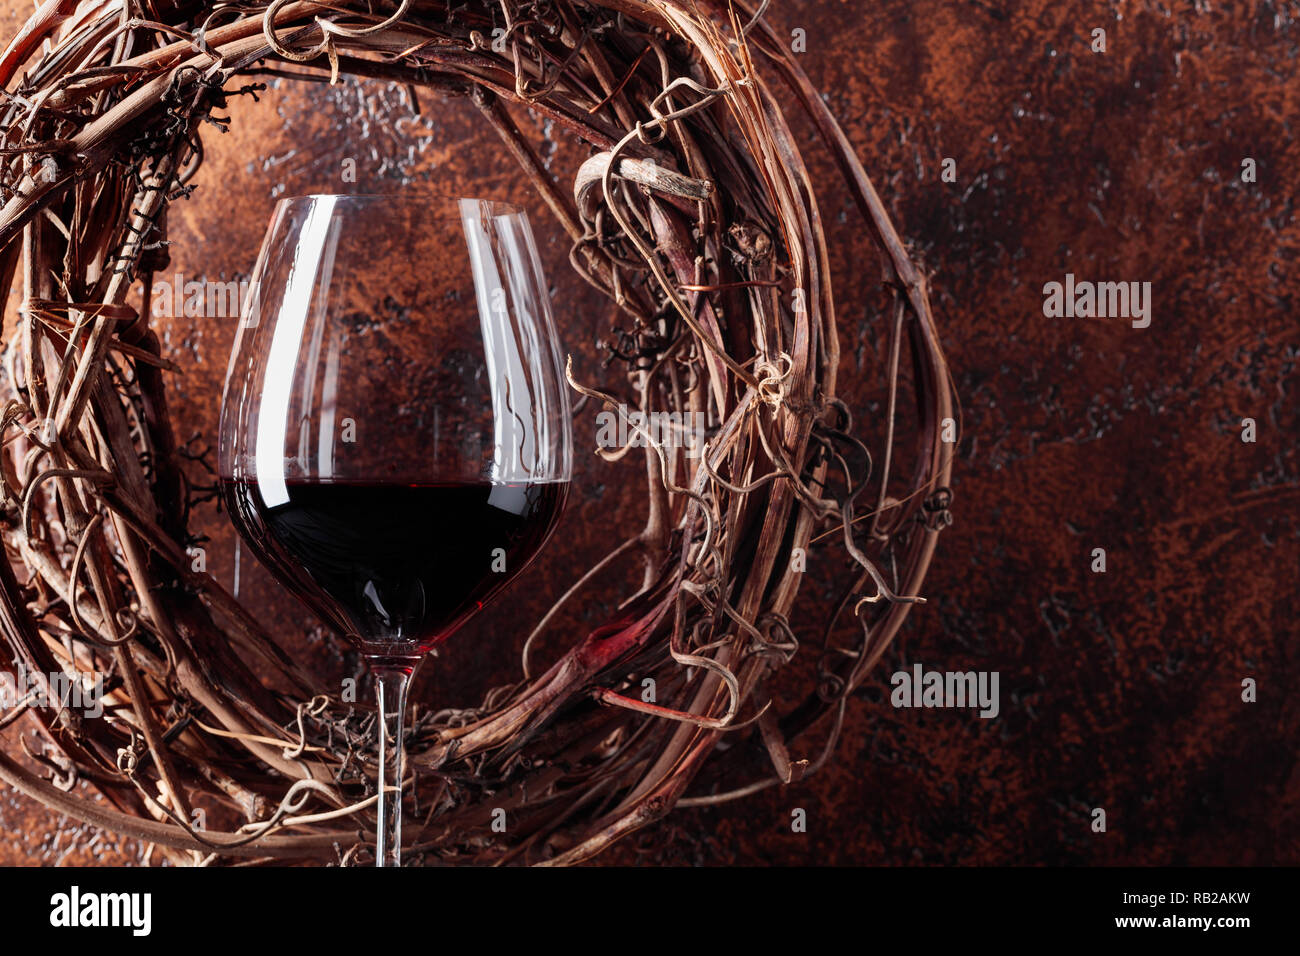 Vine wreath and glass of red wine on a vintage background. Copy space for your text. Stock Photo